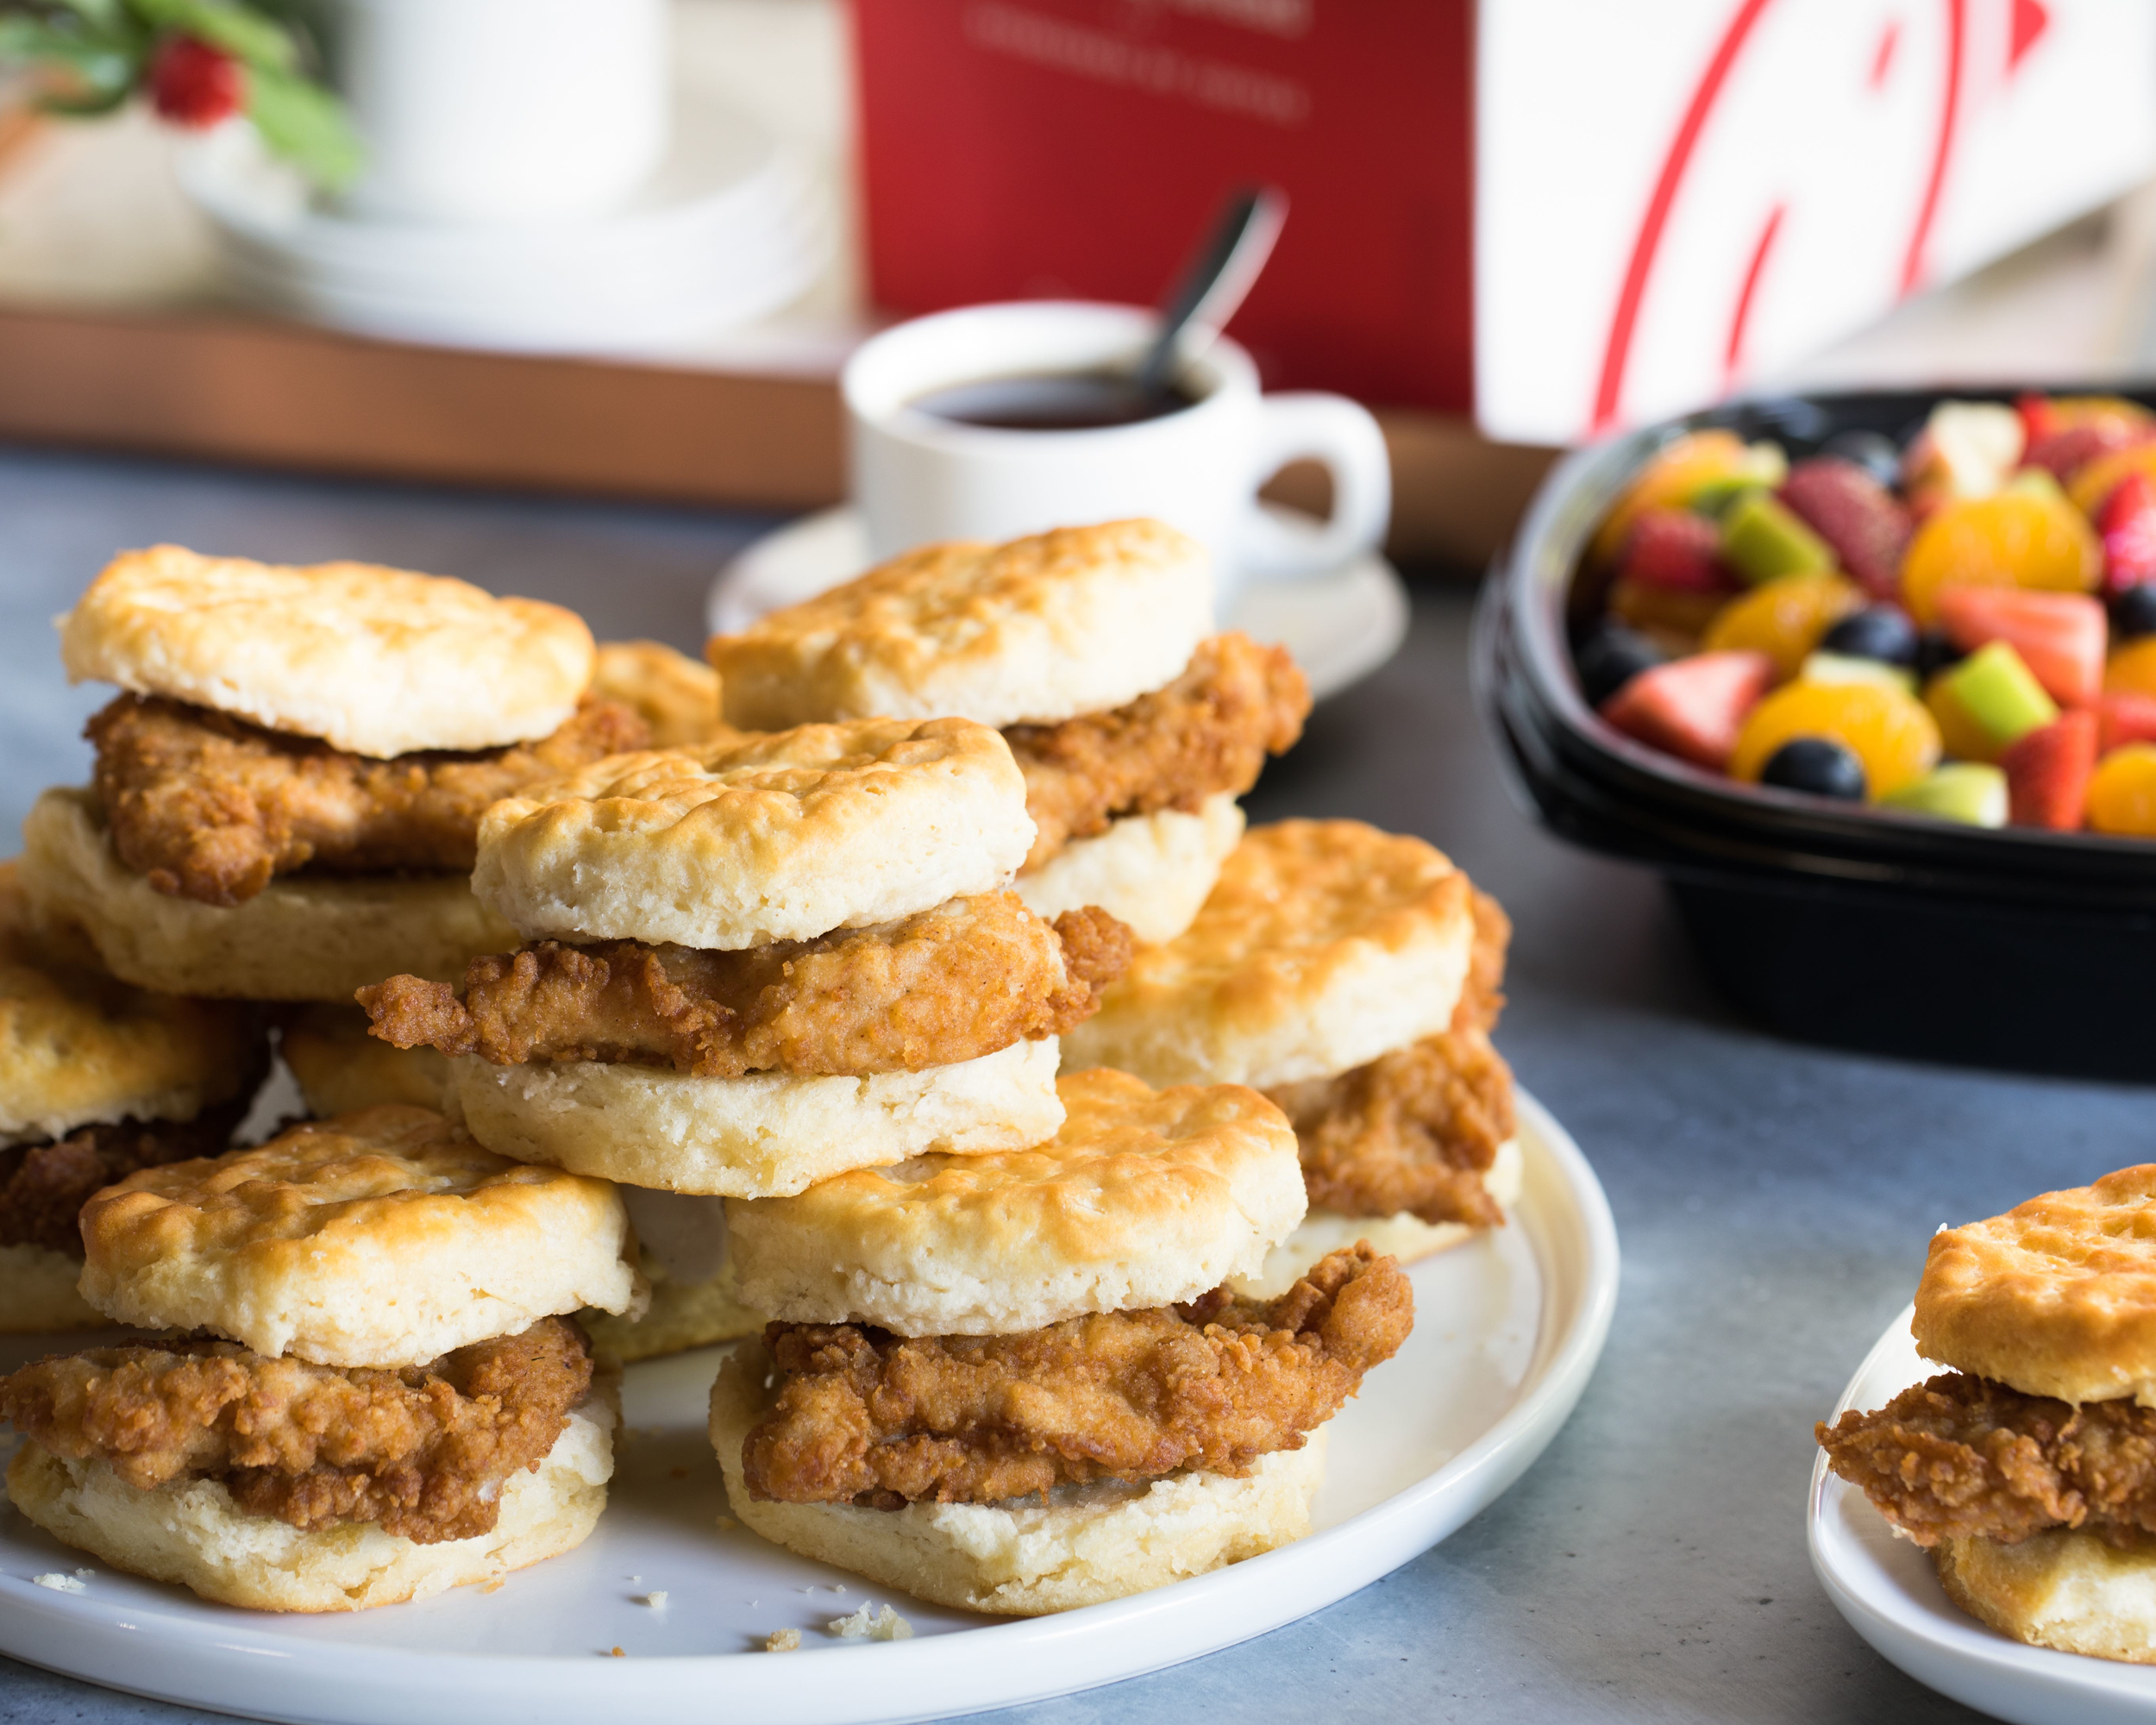 Chick-fil-A catering with chicken biscuits and fruit